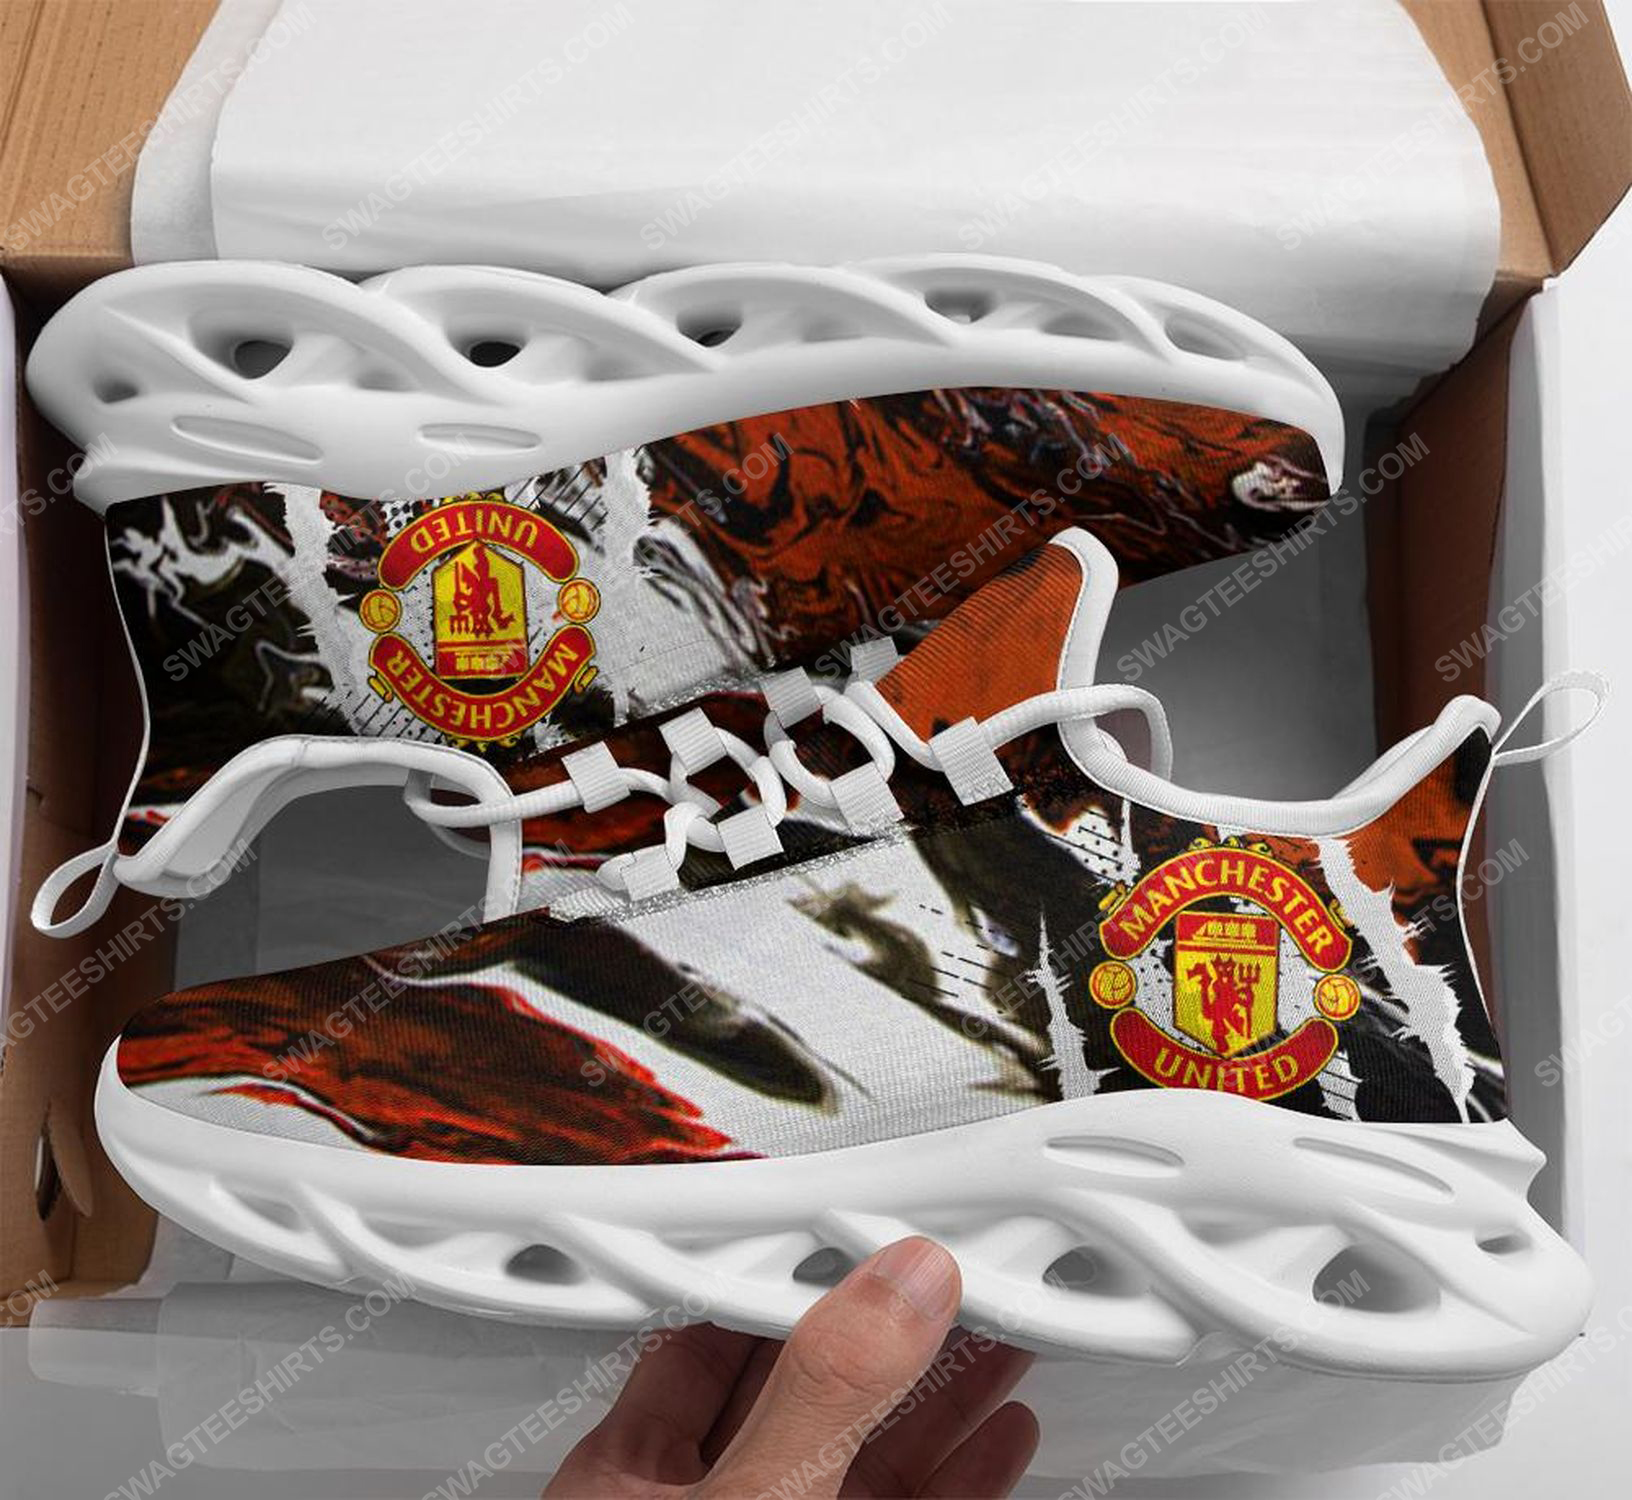 The manchester united football club max soul shoes 1